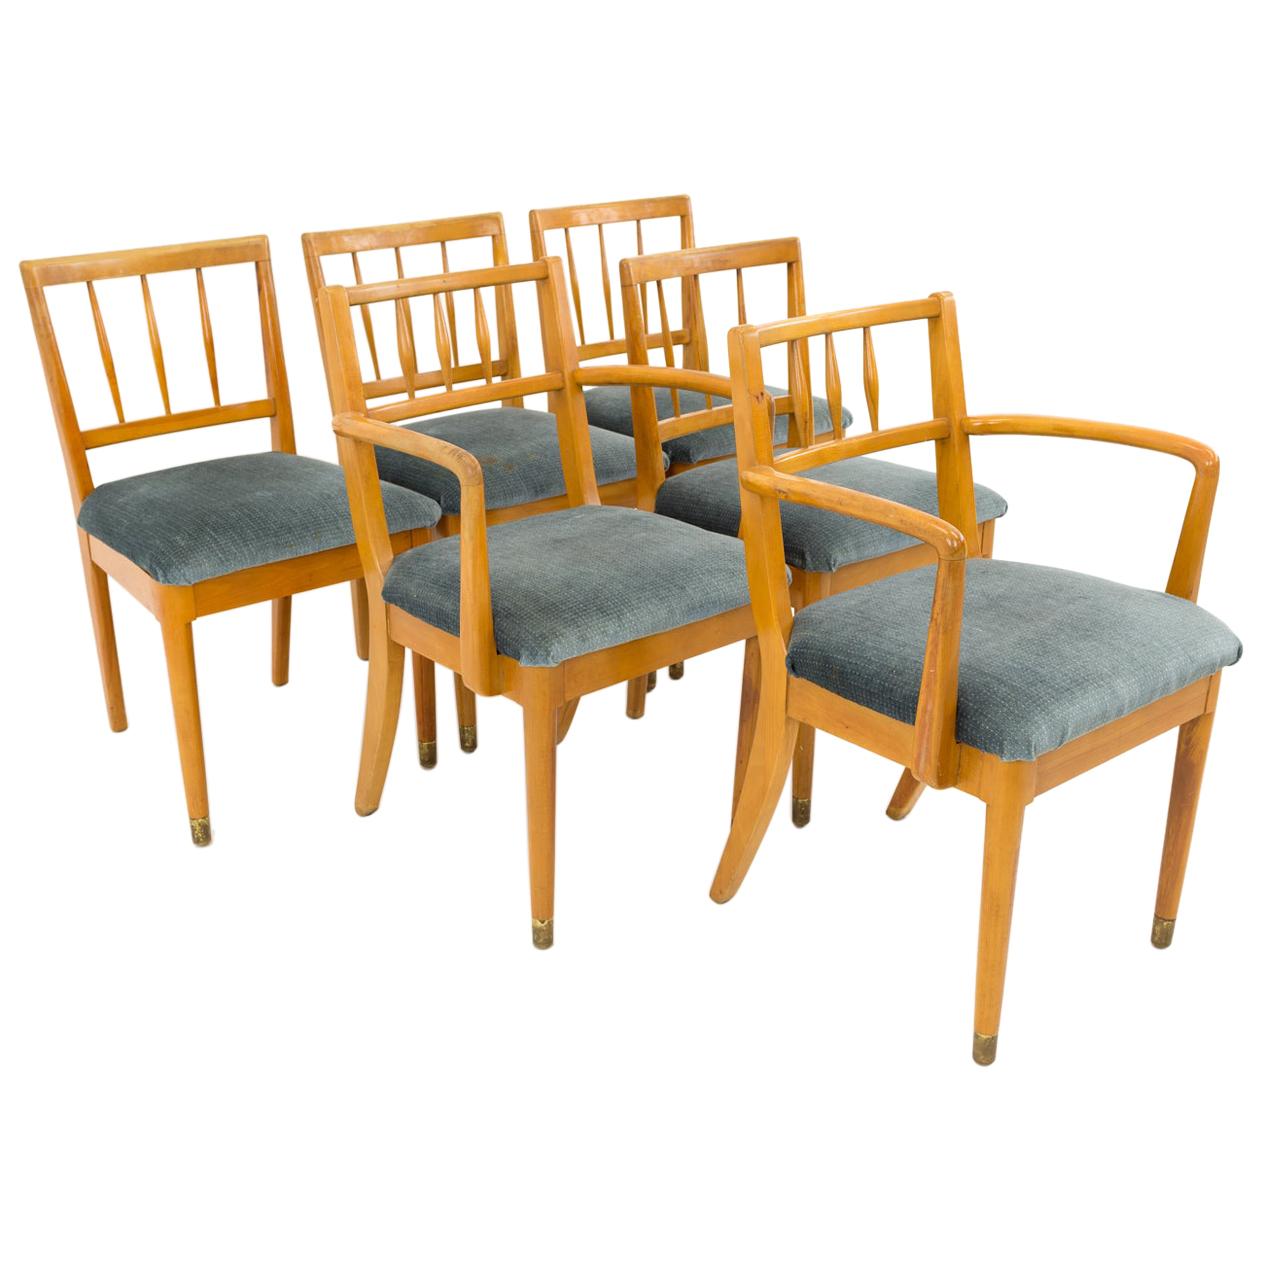 Milo Baughman for Drexel New Todays Living Midcentury Dining Chairs, Set of 6